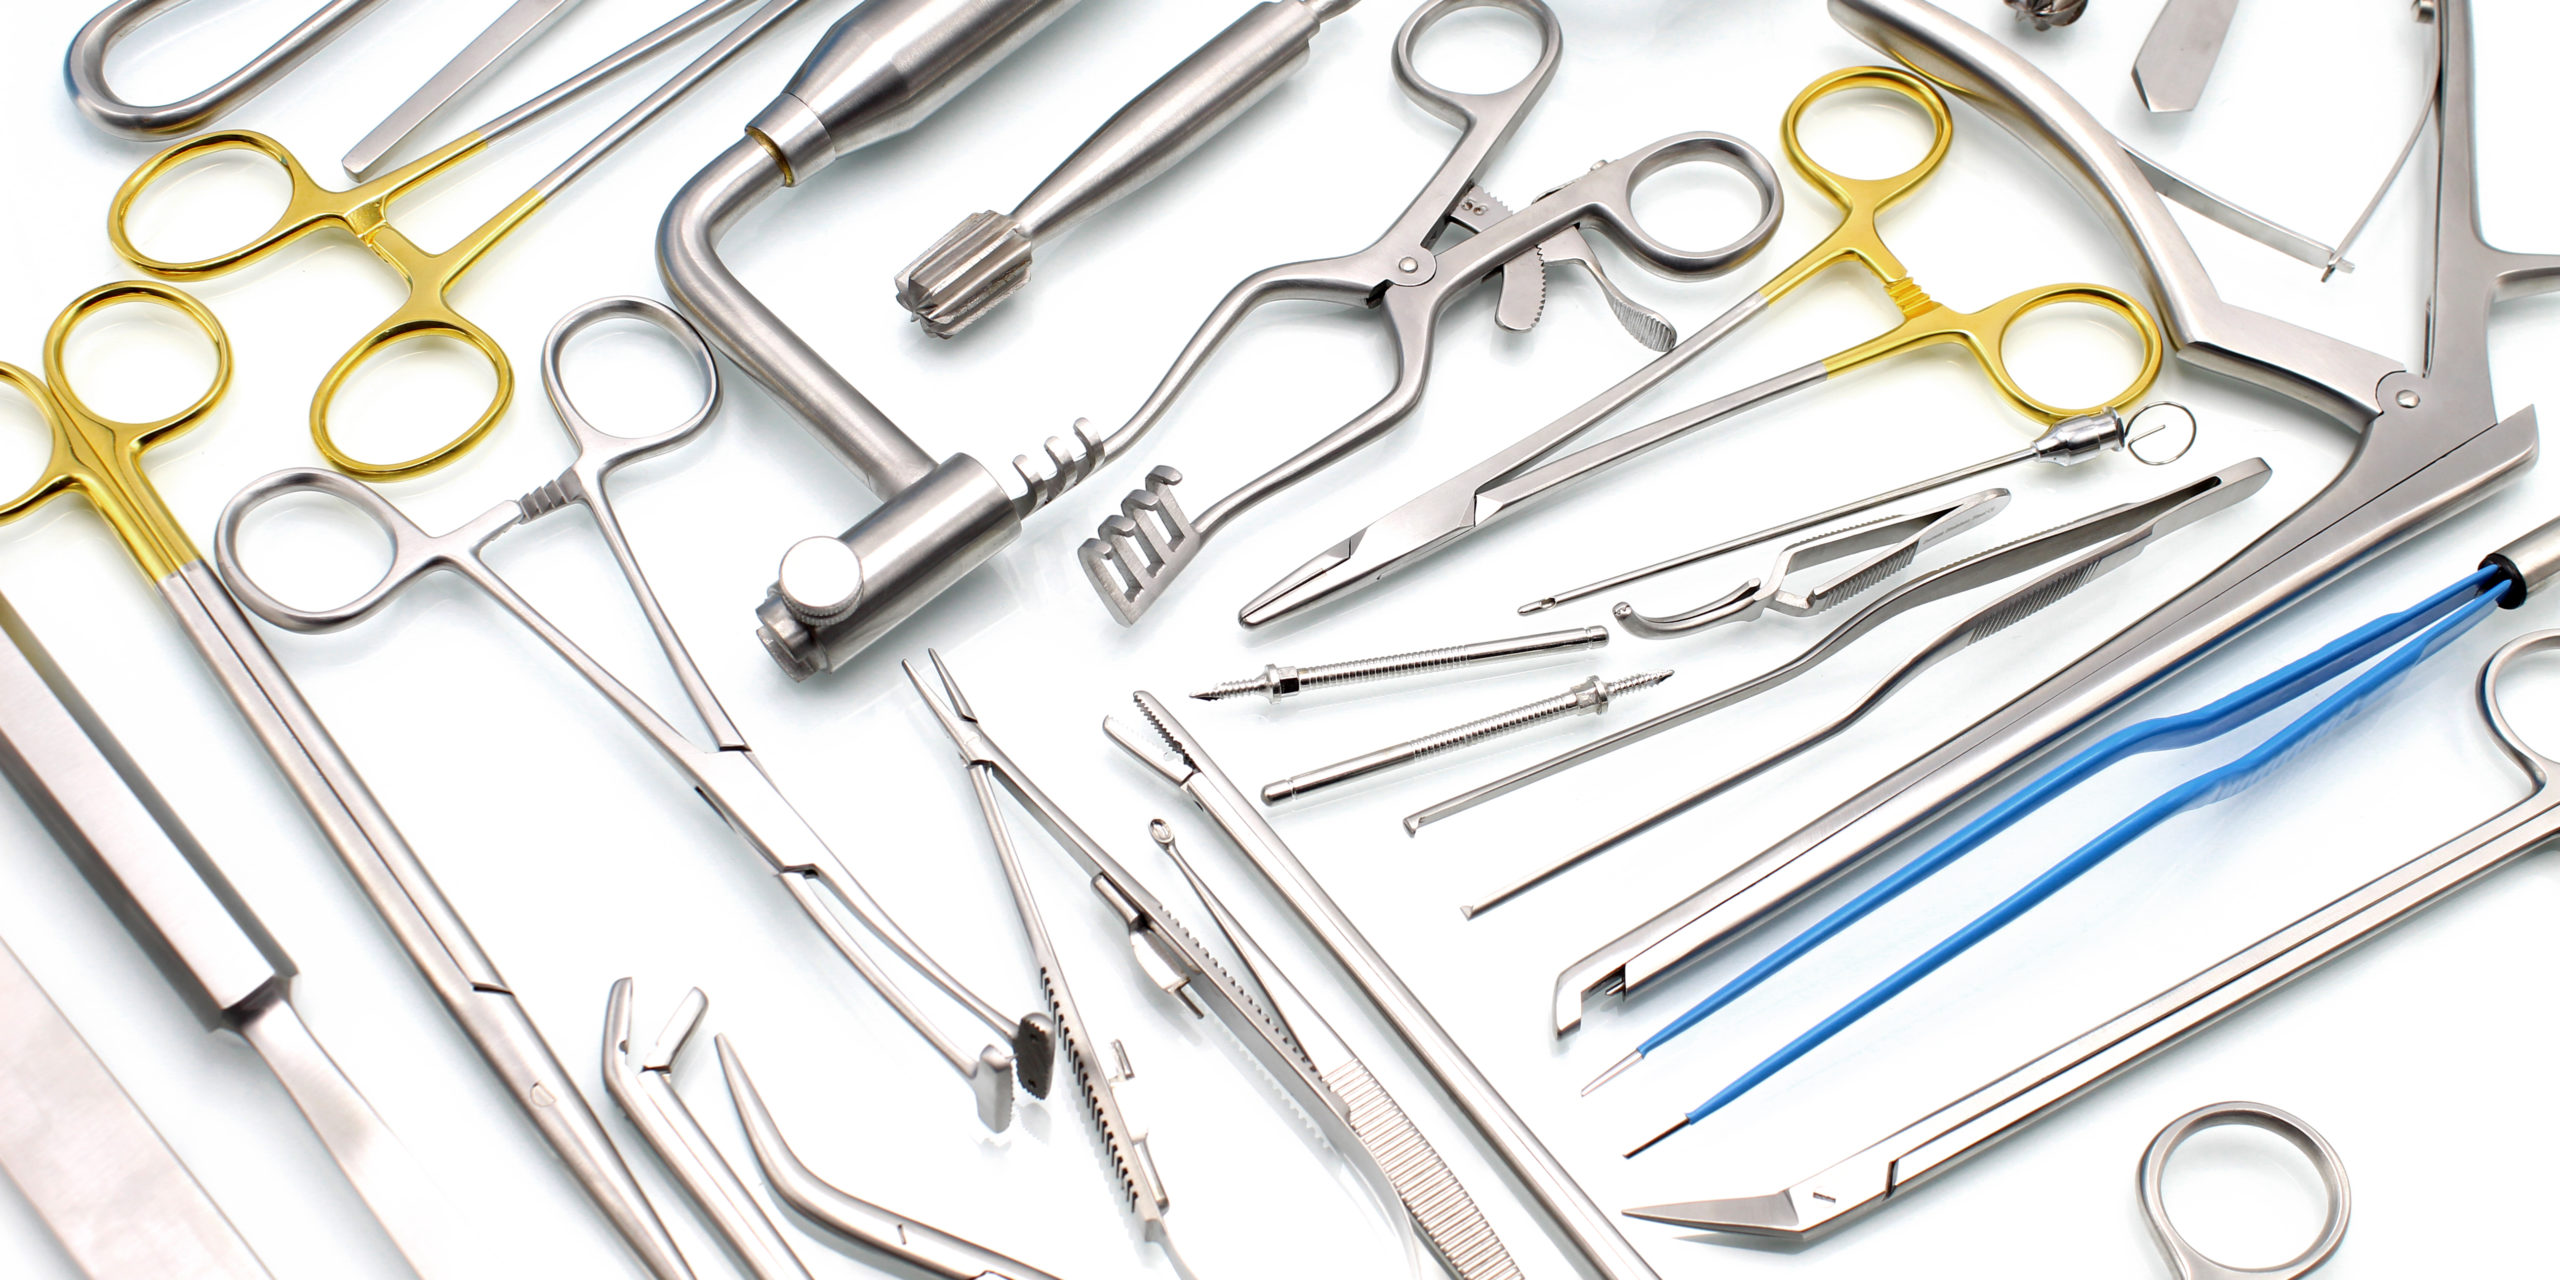 One of the most used Dental Surgical Instruments in the World